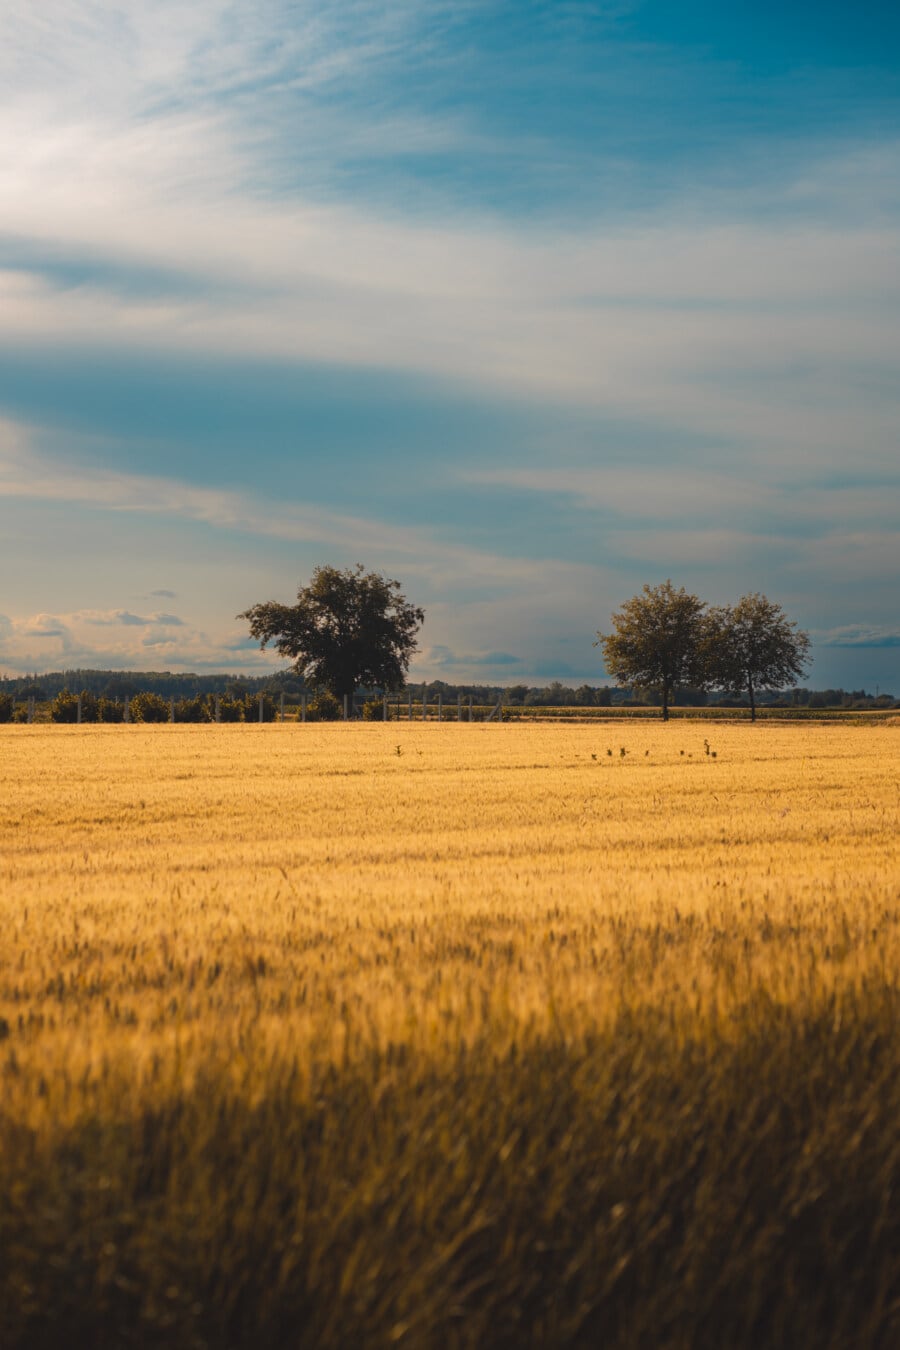 wheatfield, flat field, agriculture, landscape, wheat, rural, cereal, field, countryside, nature